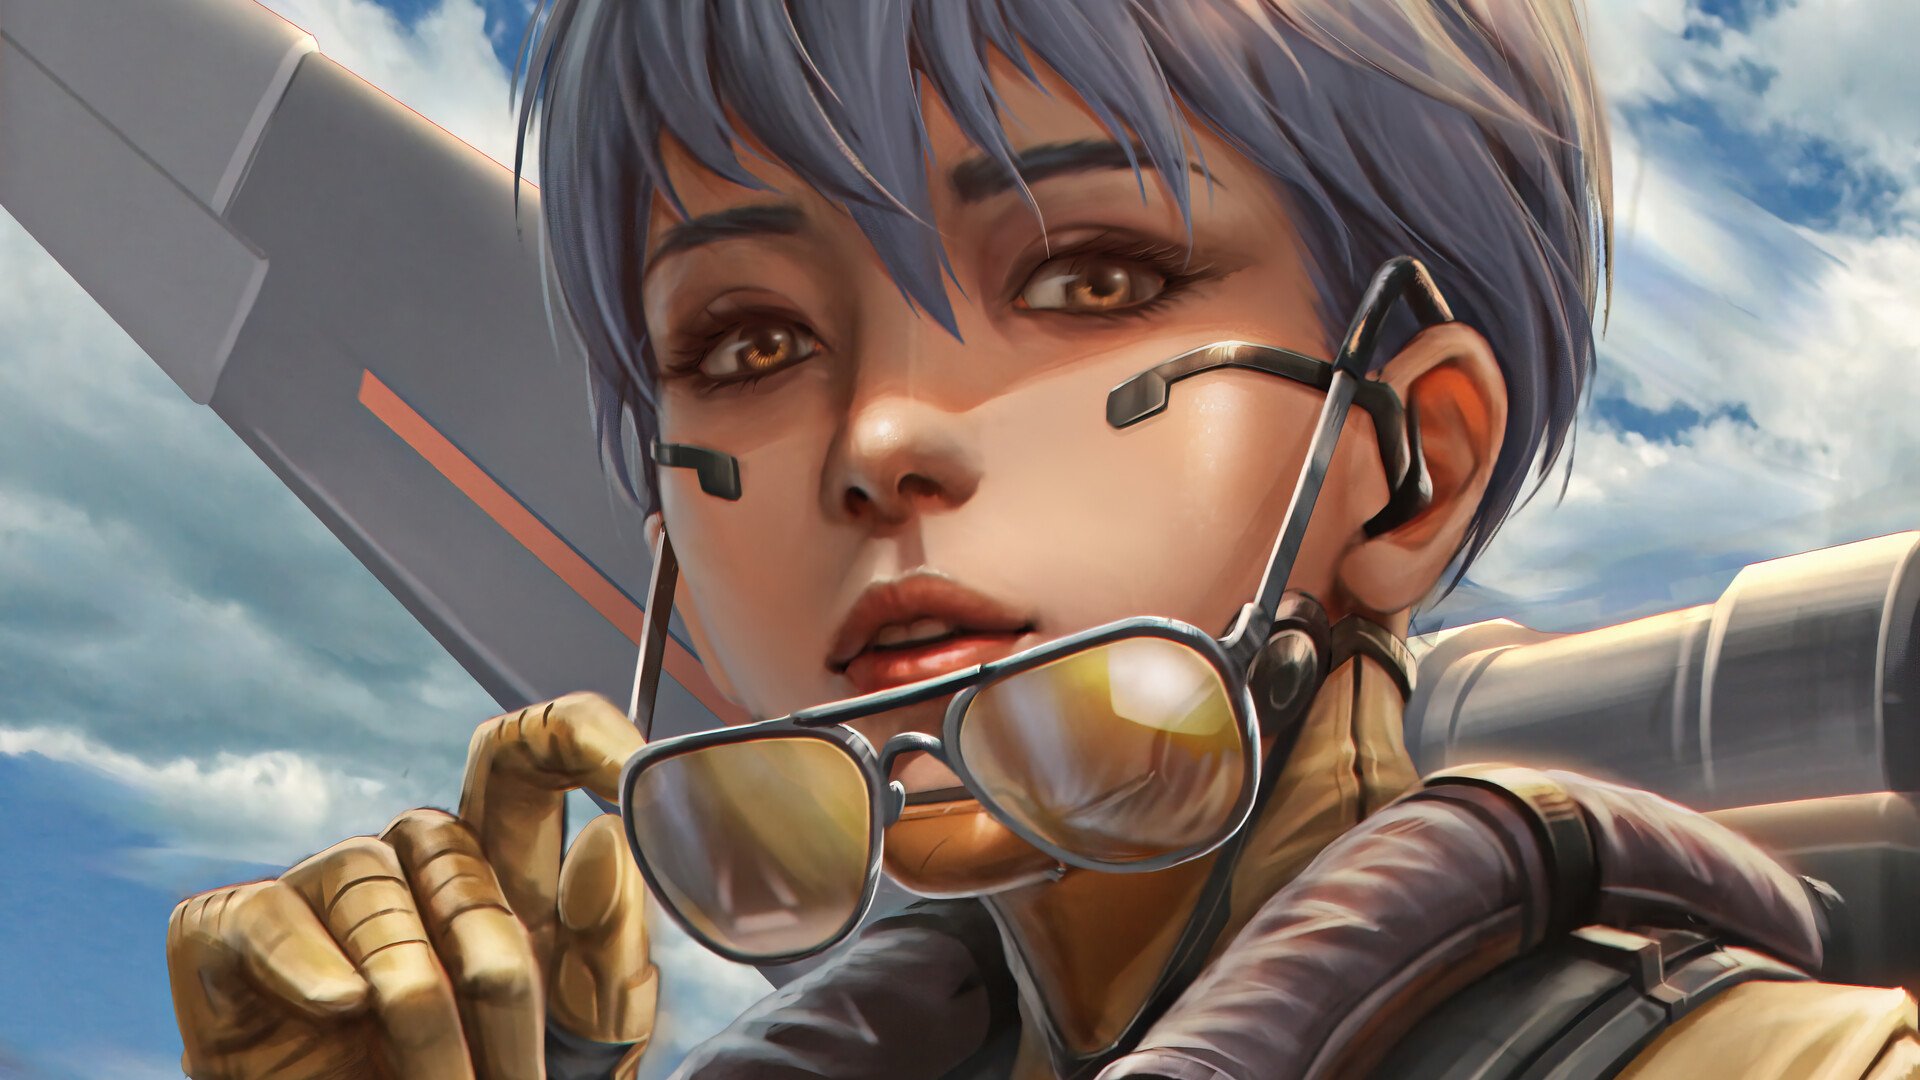 Apex Legends: Tips and Tricks for Playing Valkyrie